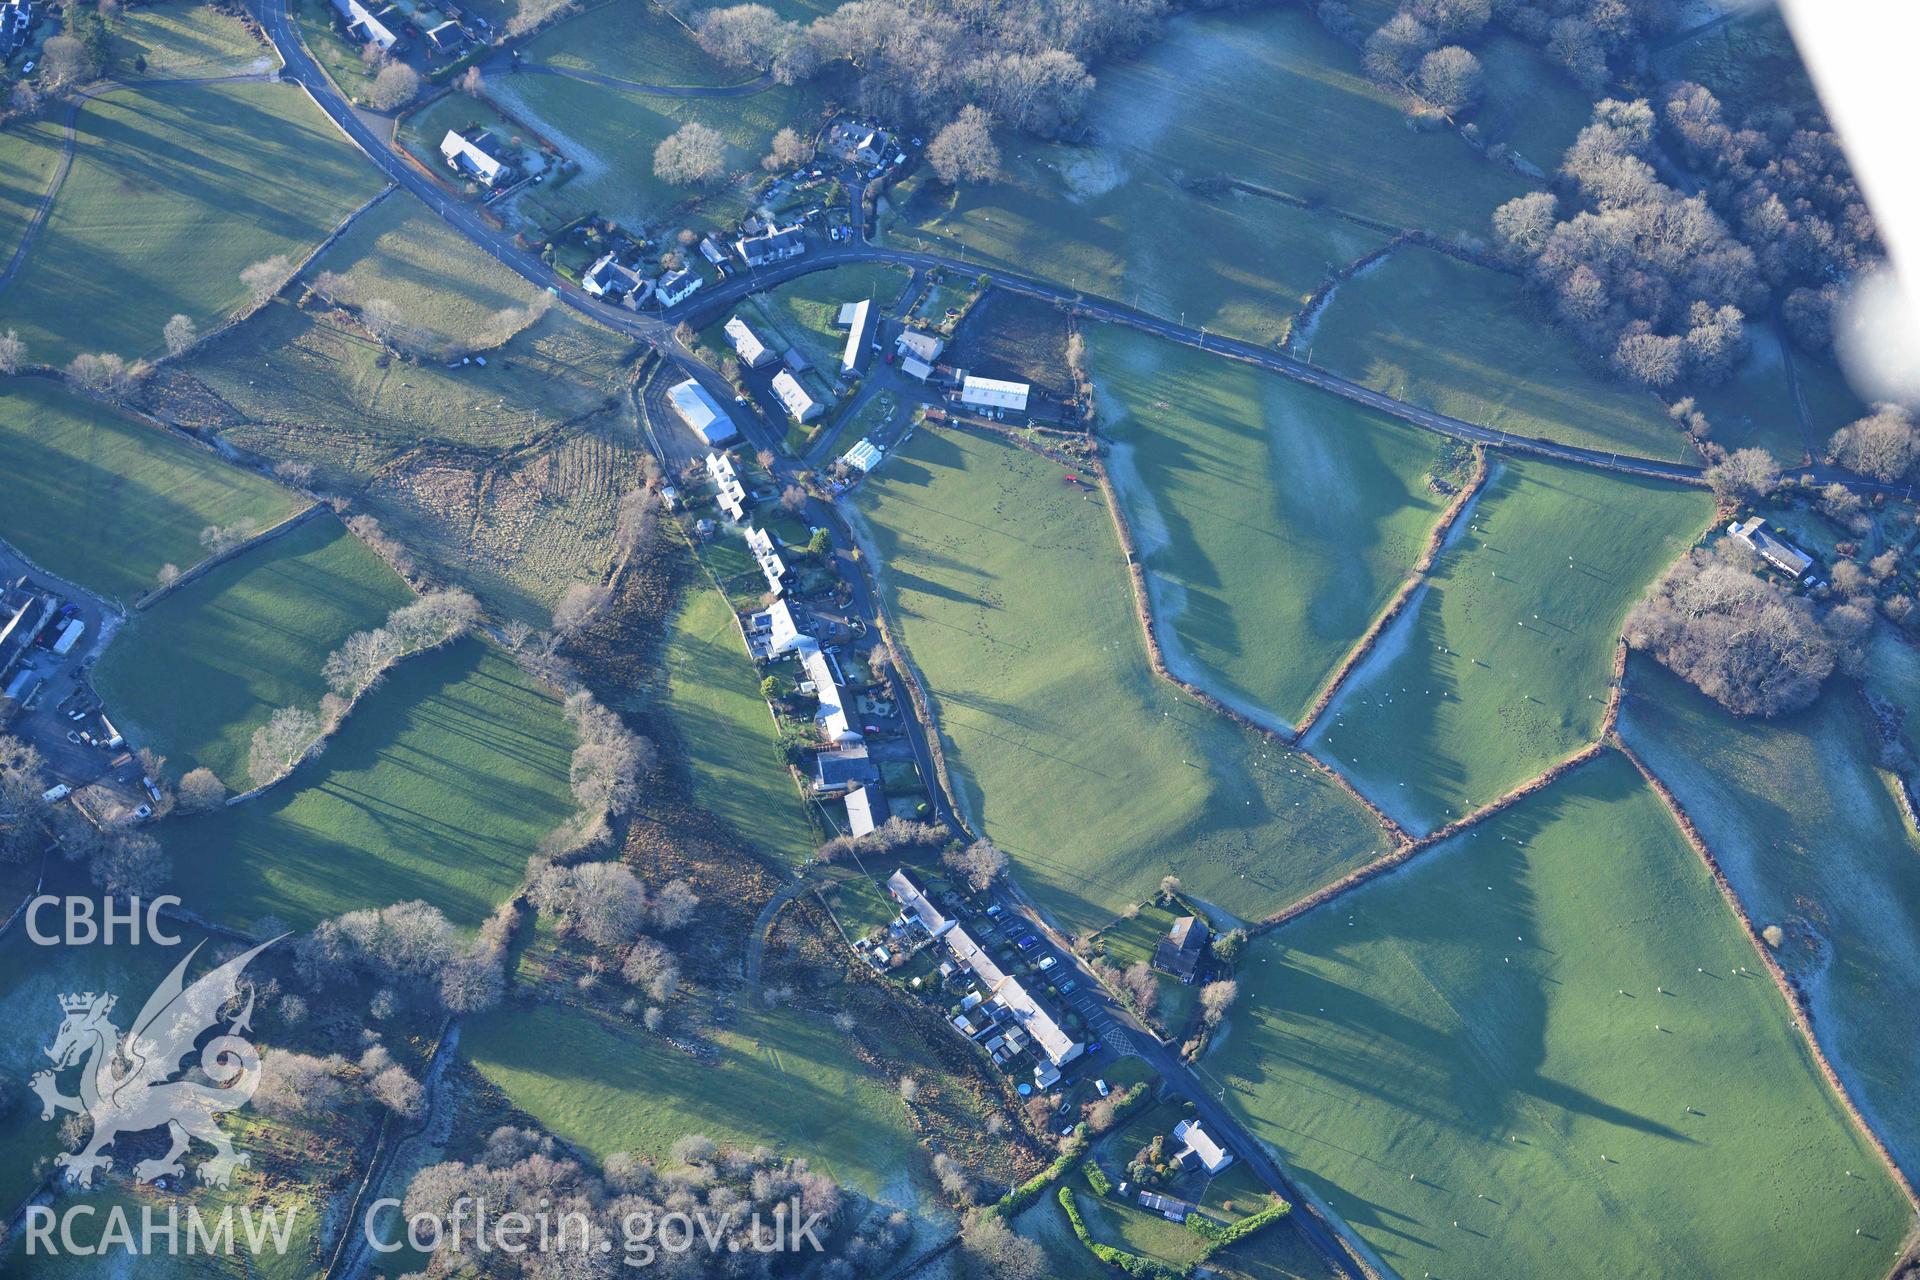 Oblique aerial photograph of Brithdir Roman fort in winter light. Taken during the Royal Commission’s programme of archaeological aerial reconnaissance by Toby Driver on 17th January 2022